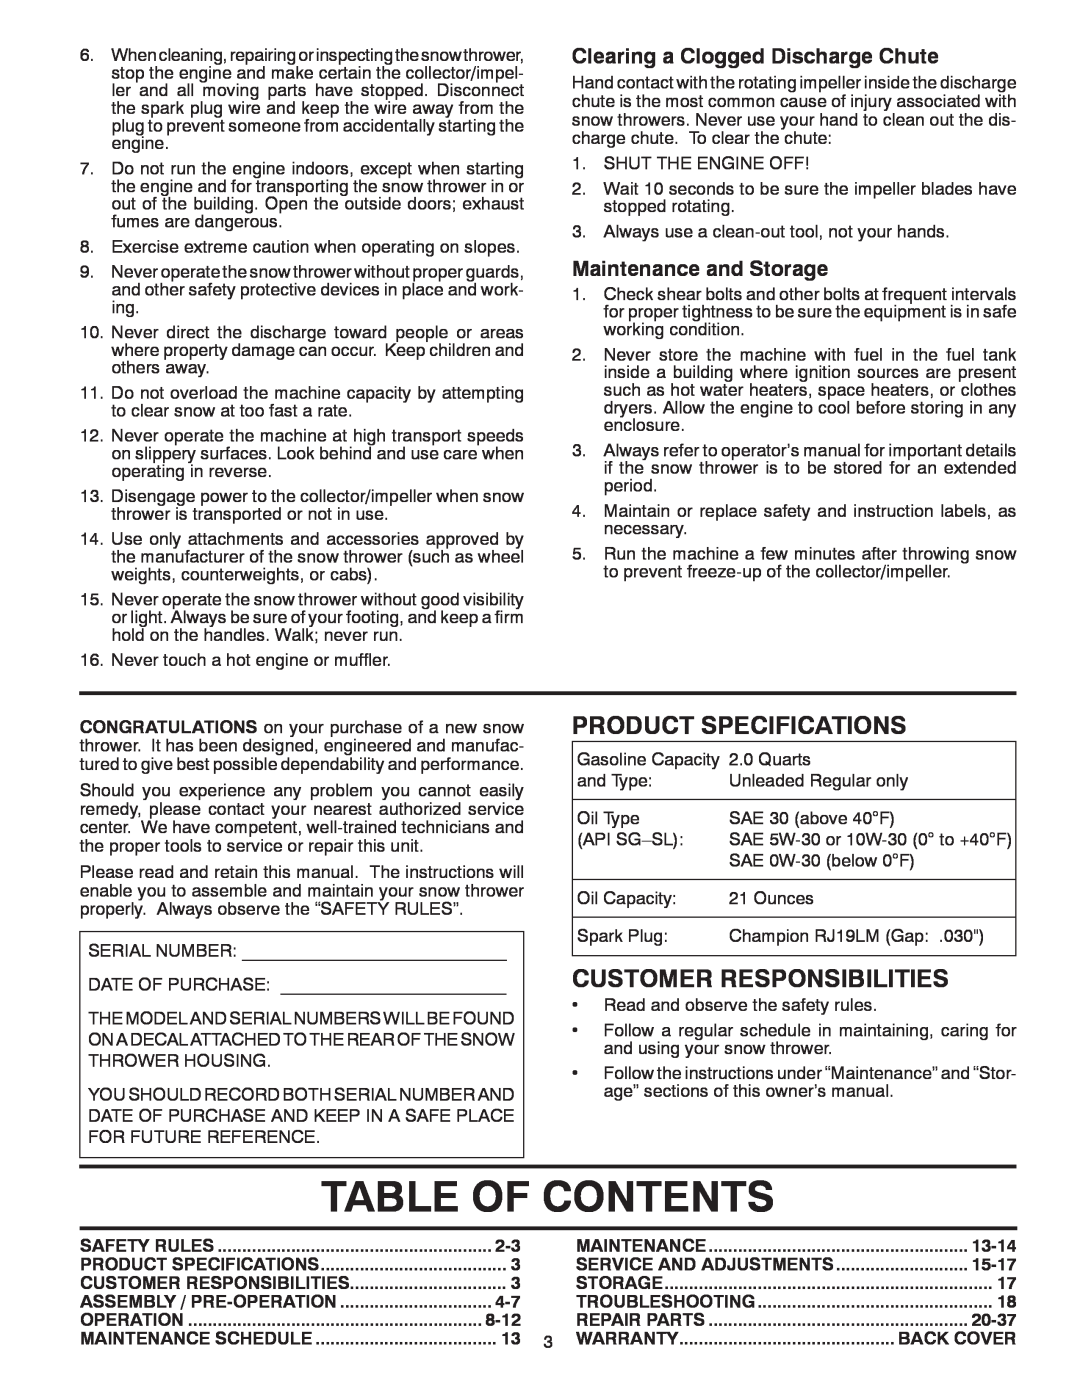 Poulan 96192002201 Table Of Contents, Product Specifications, Customer Responsibilities, Maintenance and Storage, 13-14 